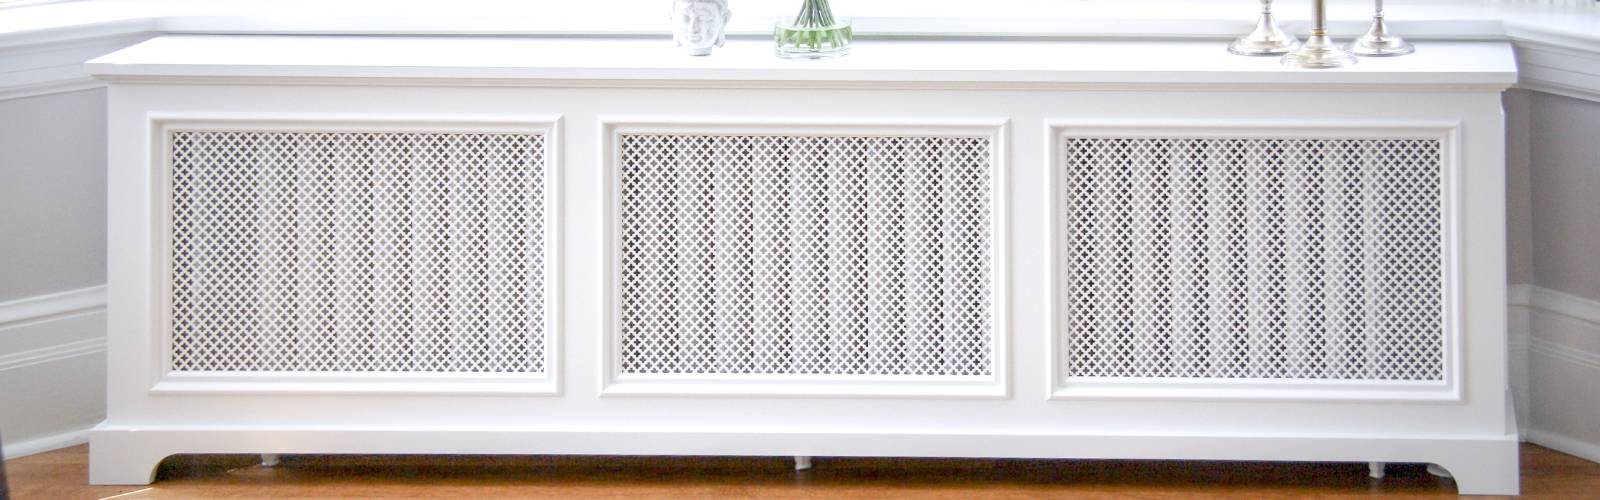 Fichman Furniture in Holland, N.Y., manufactures customized radiator covers, like this one.